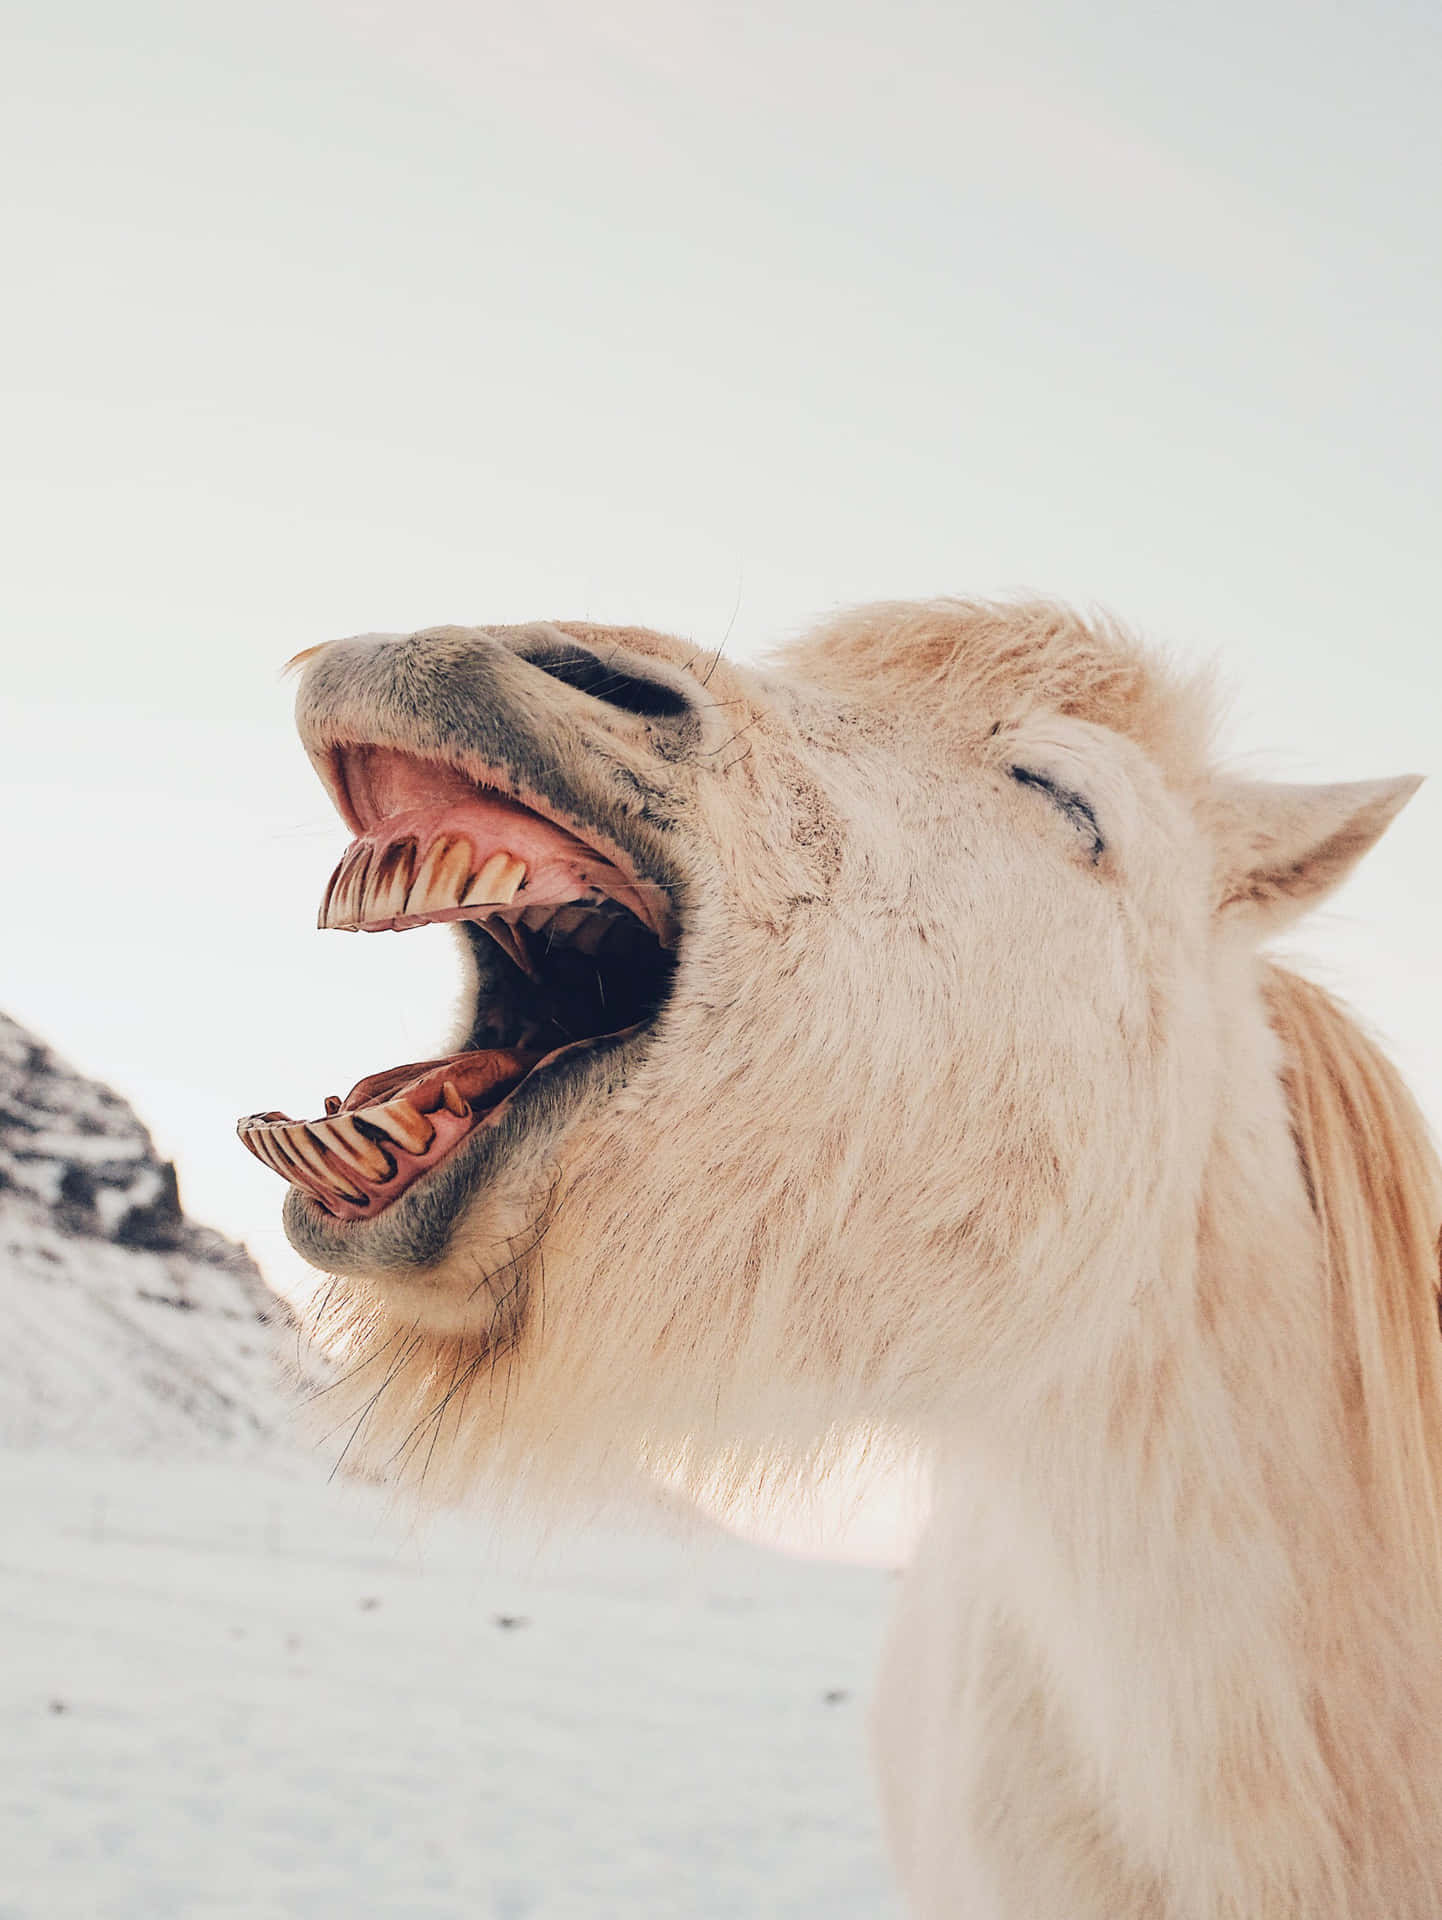 Ugly Funny Horse Sneeze Snow Wallpaper